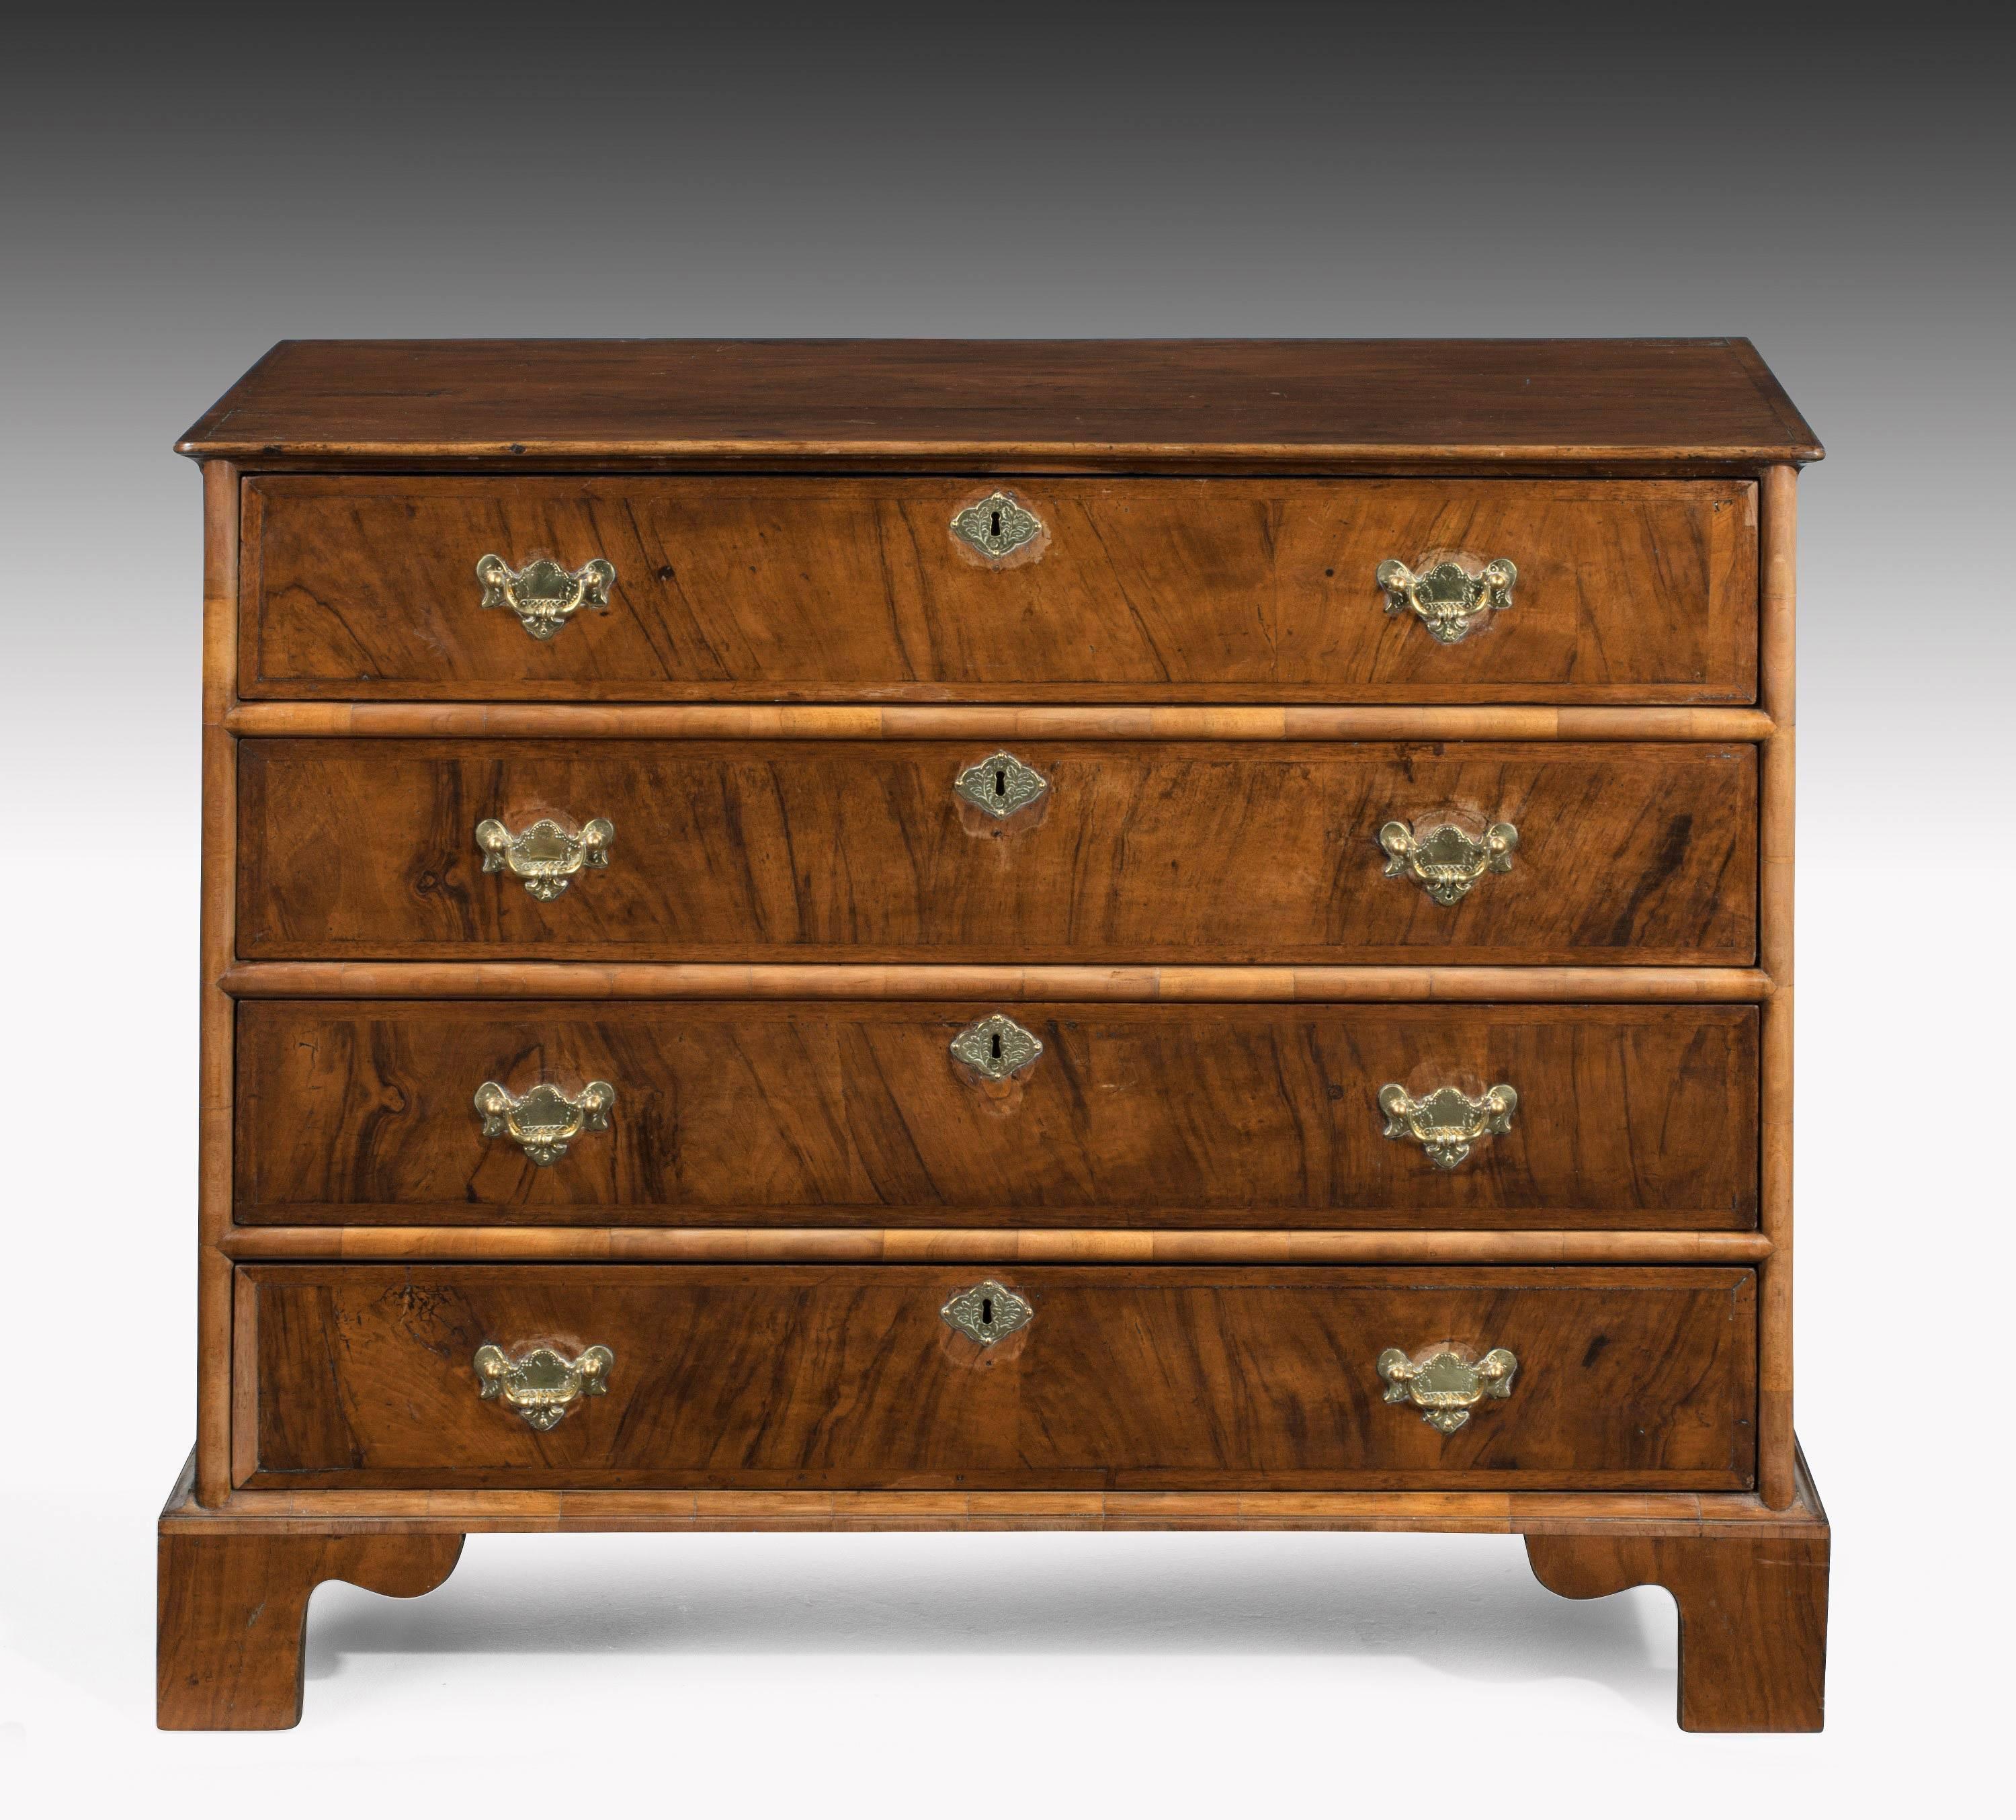 A very well figured mid-18th century chest of four long drawers.